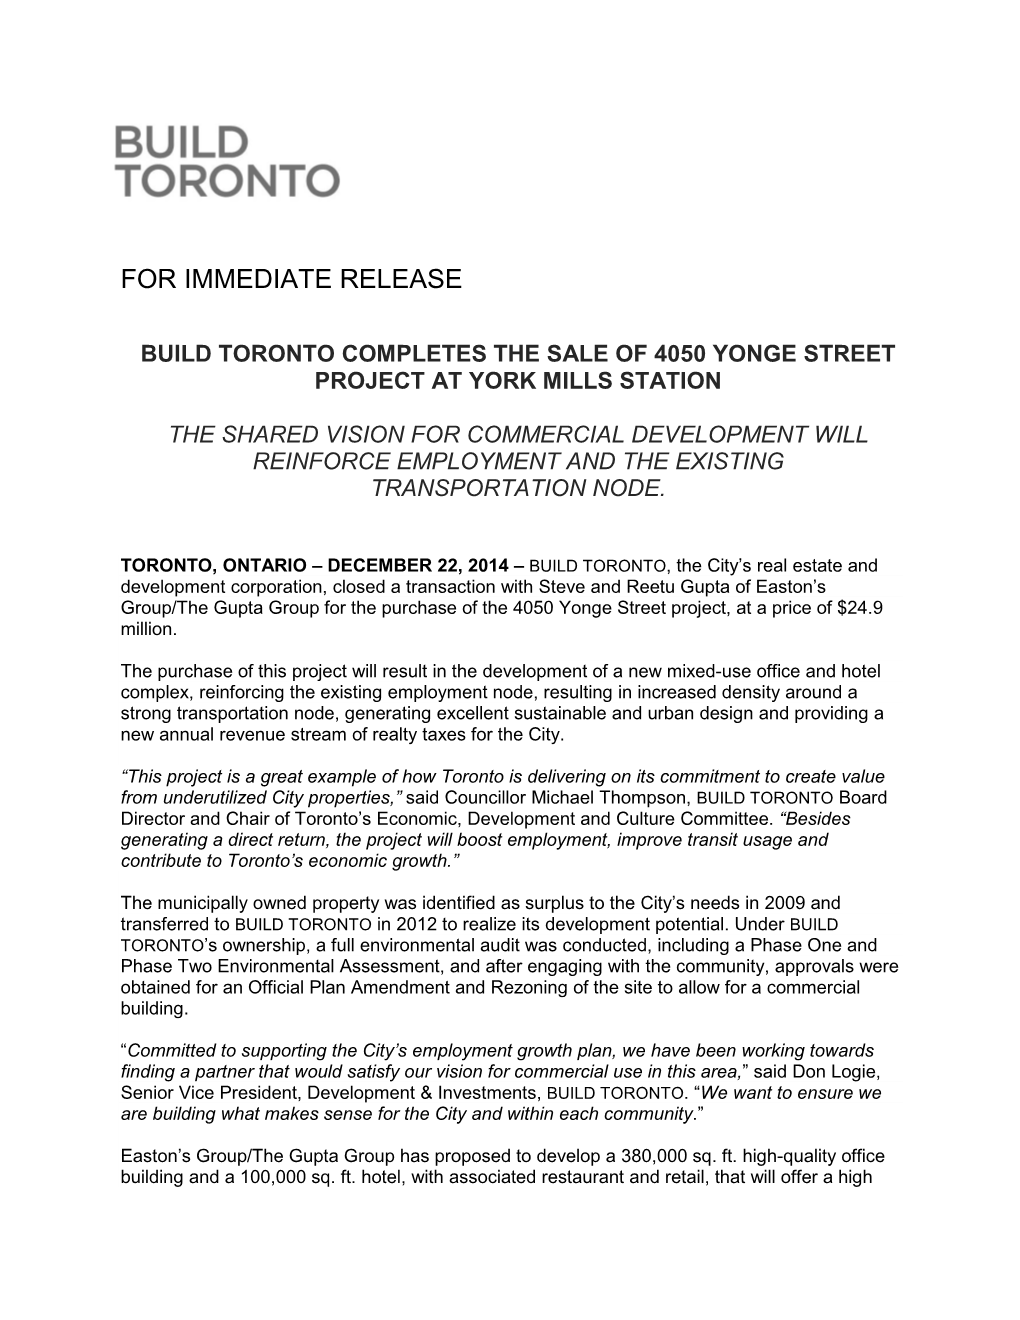 Build Toronto Completes the Sale of 4050 Yonge Street Project at York Mills Station